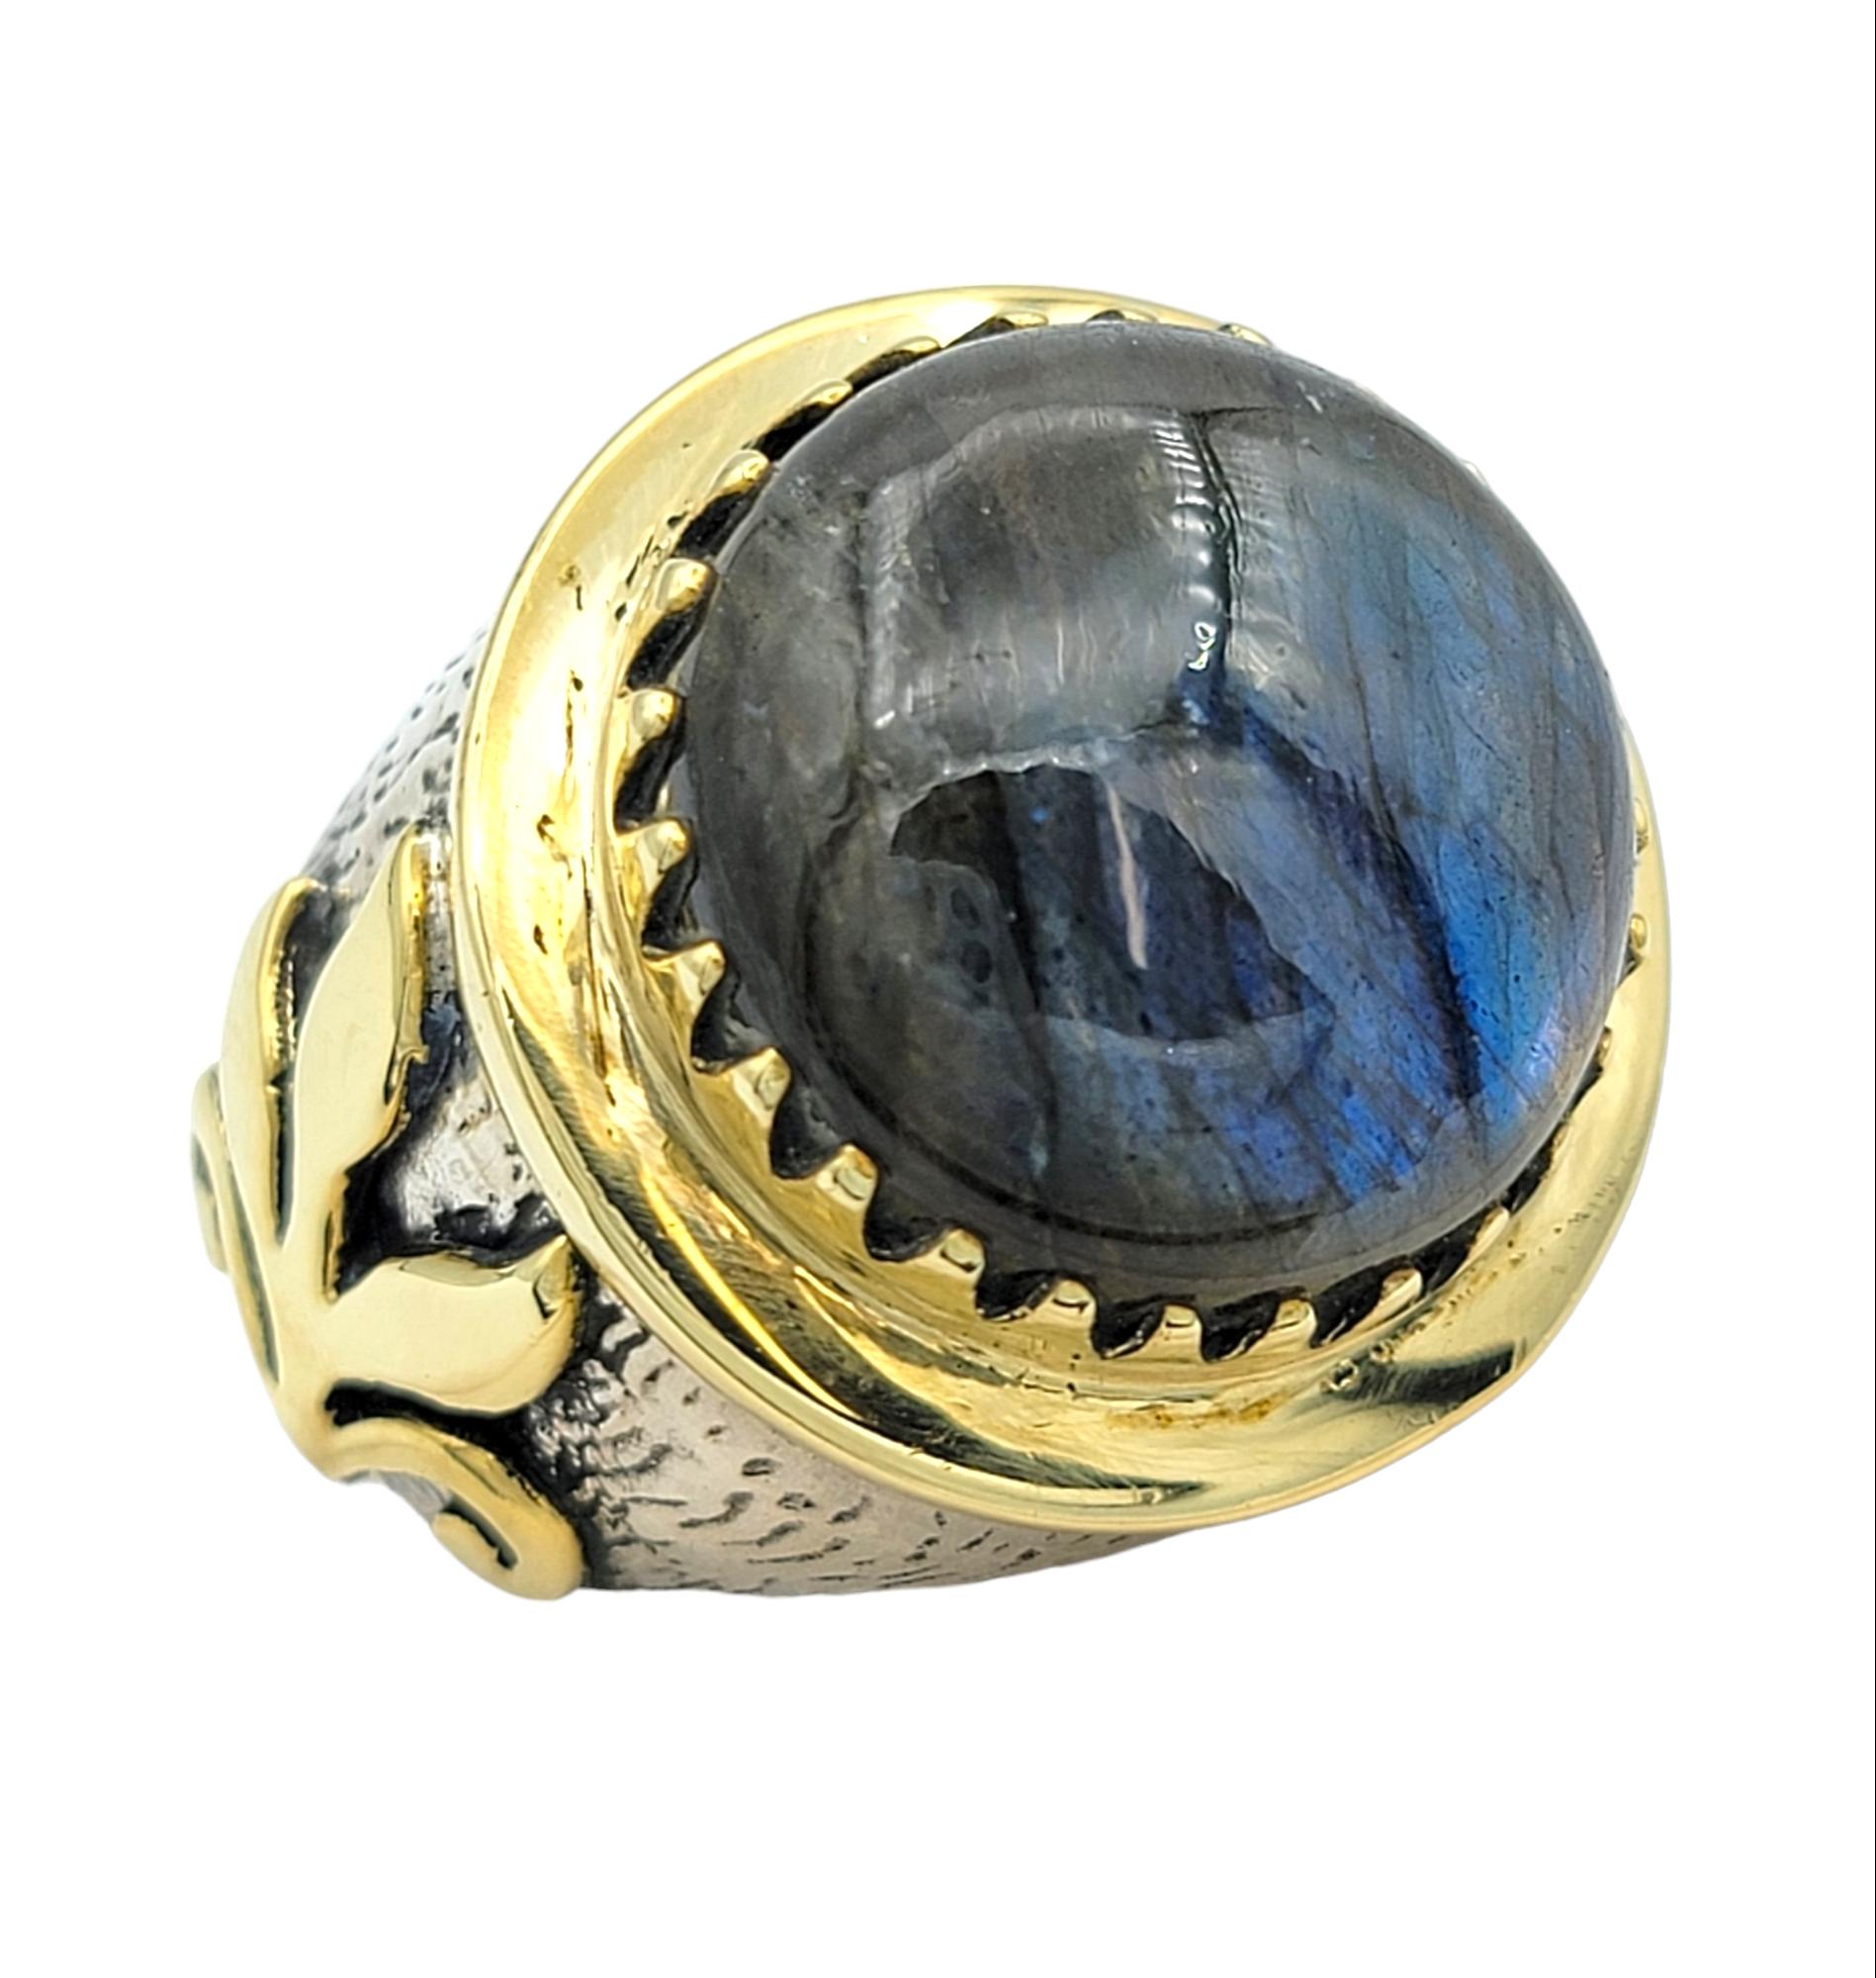 5.84 Carat Round Blue Labradorite Cabochon Cocktail Ring in Silver and Gold In Fair Condition For Sale In Scottsdale, AZ